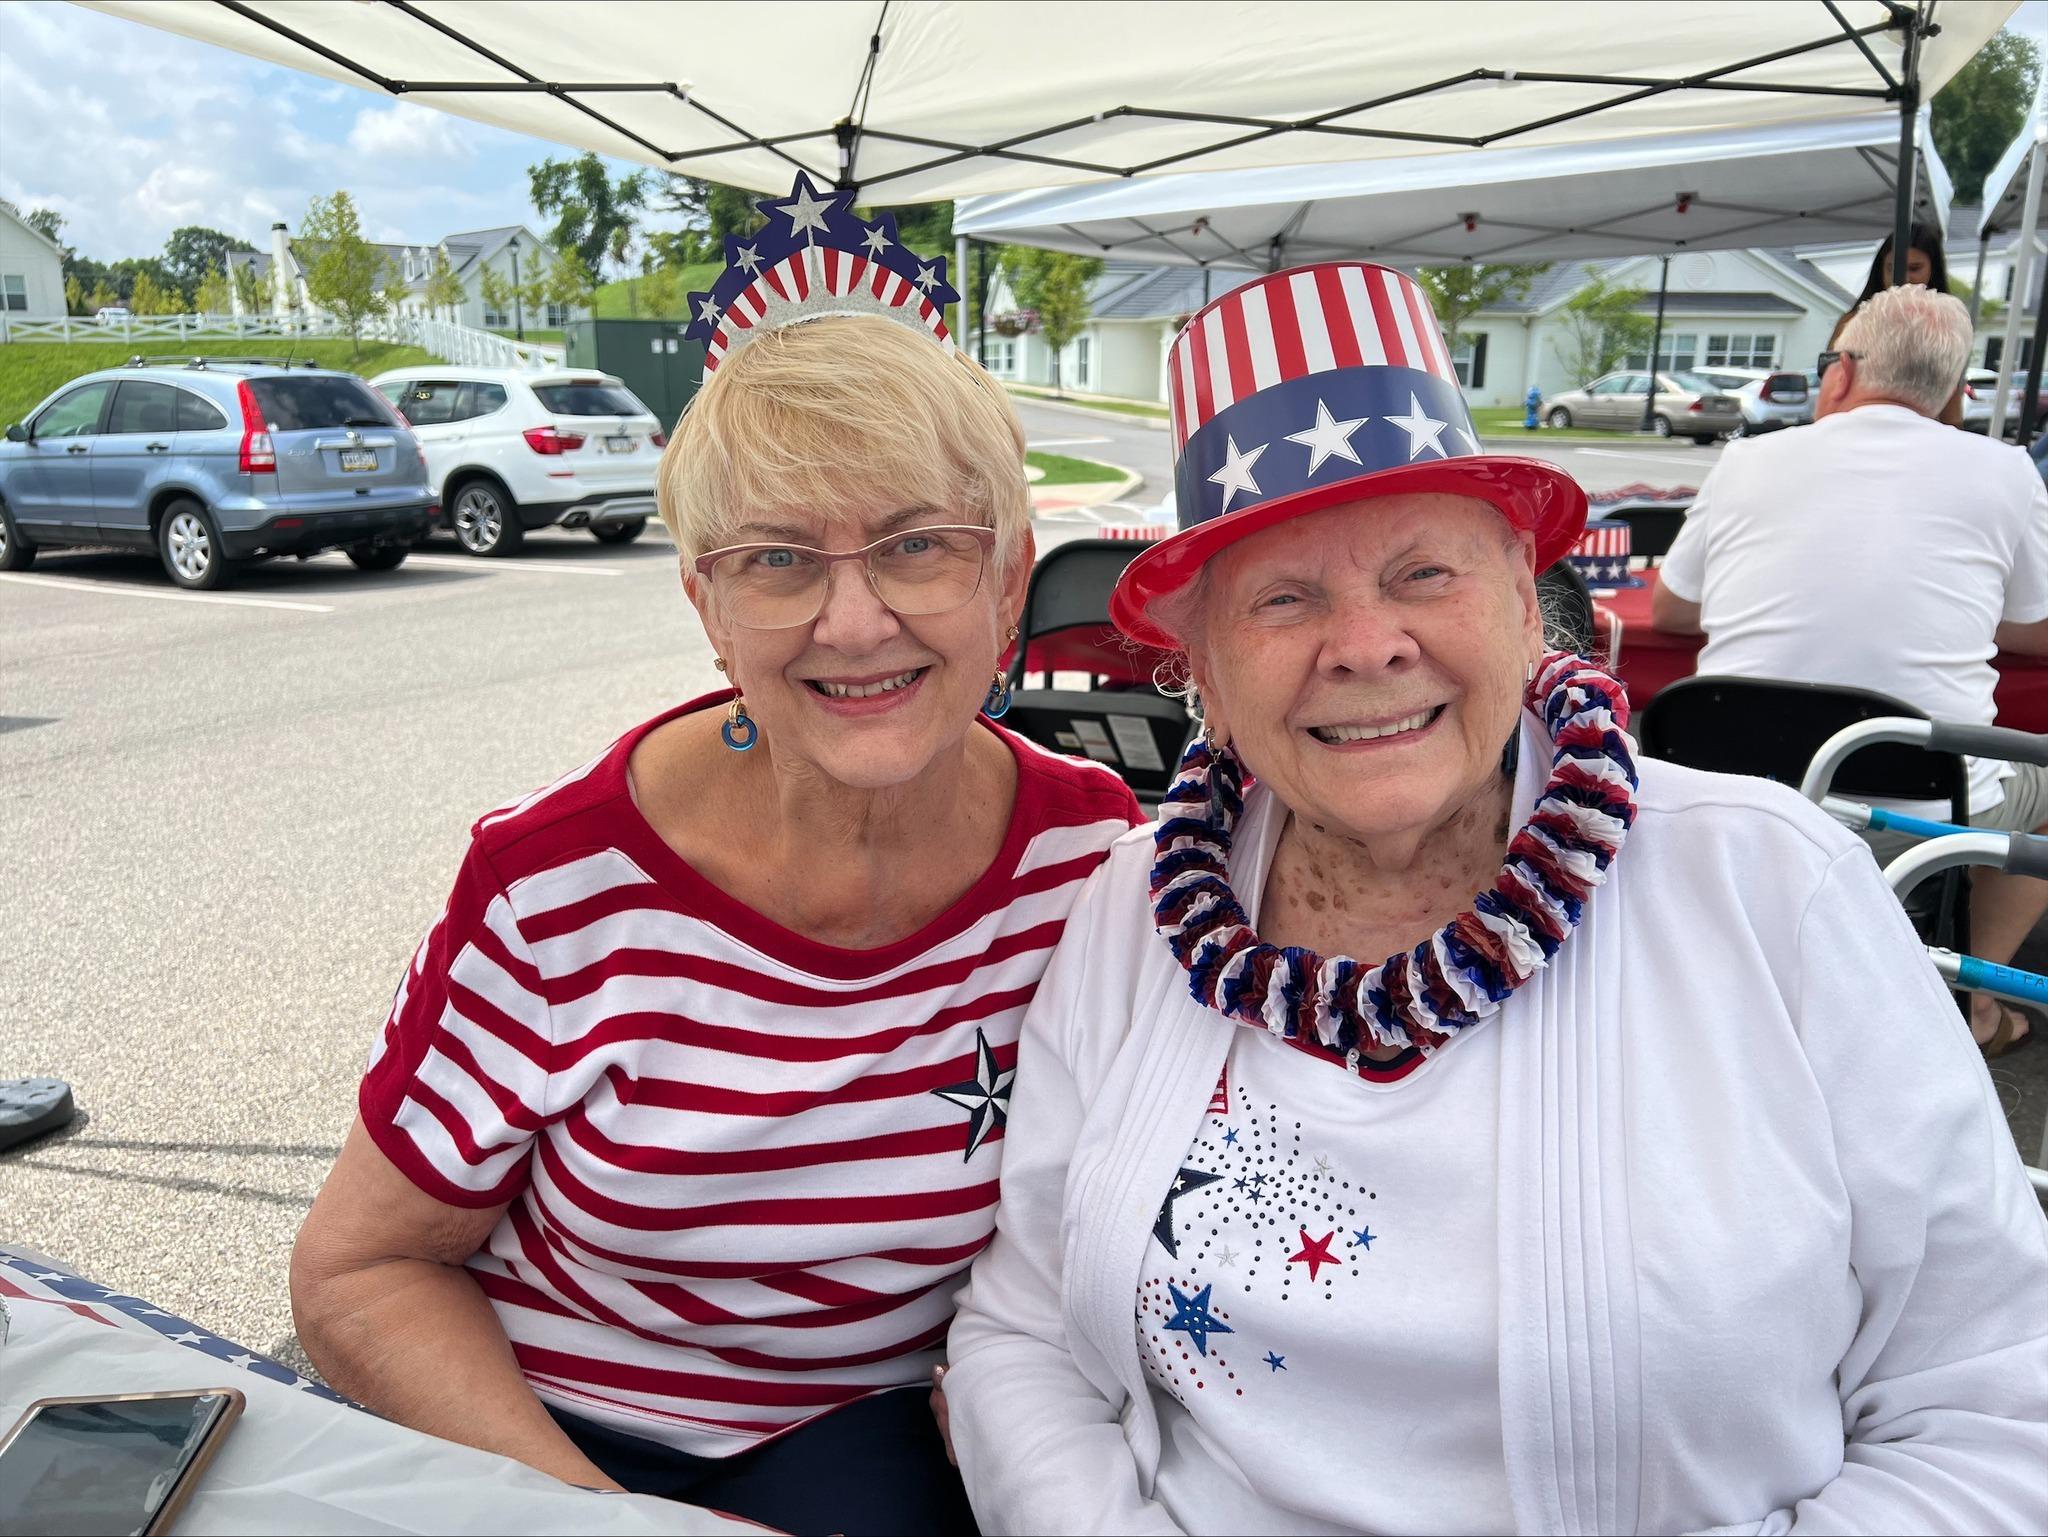 Two smiling people in patriotic attire, one wearing a stars-and-stripes hat, at an outdoor event.